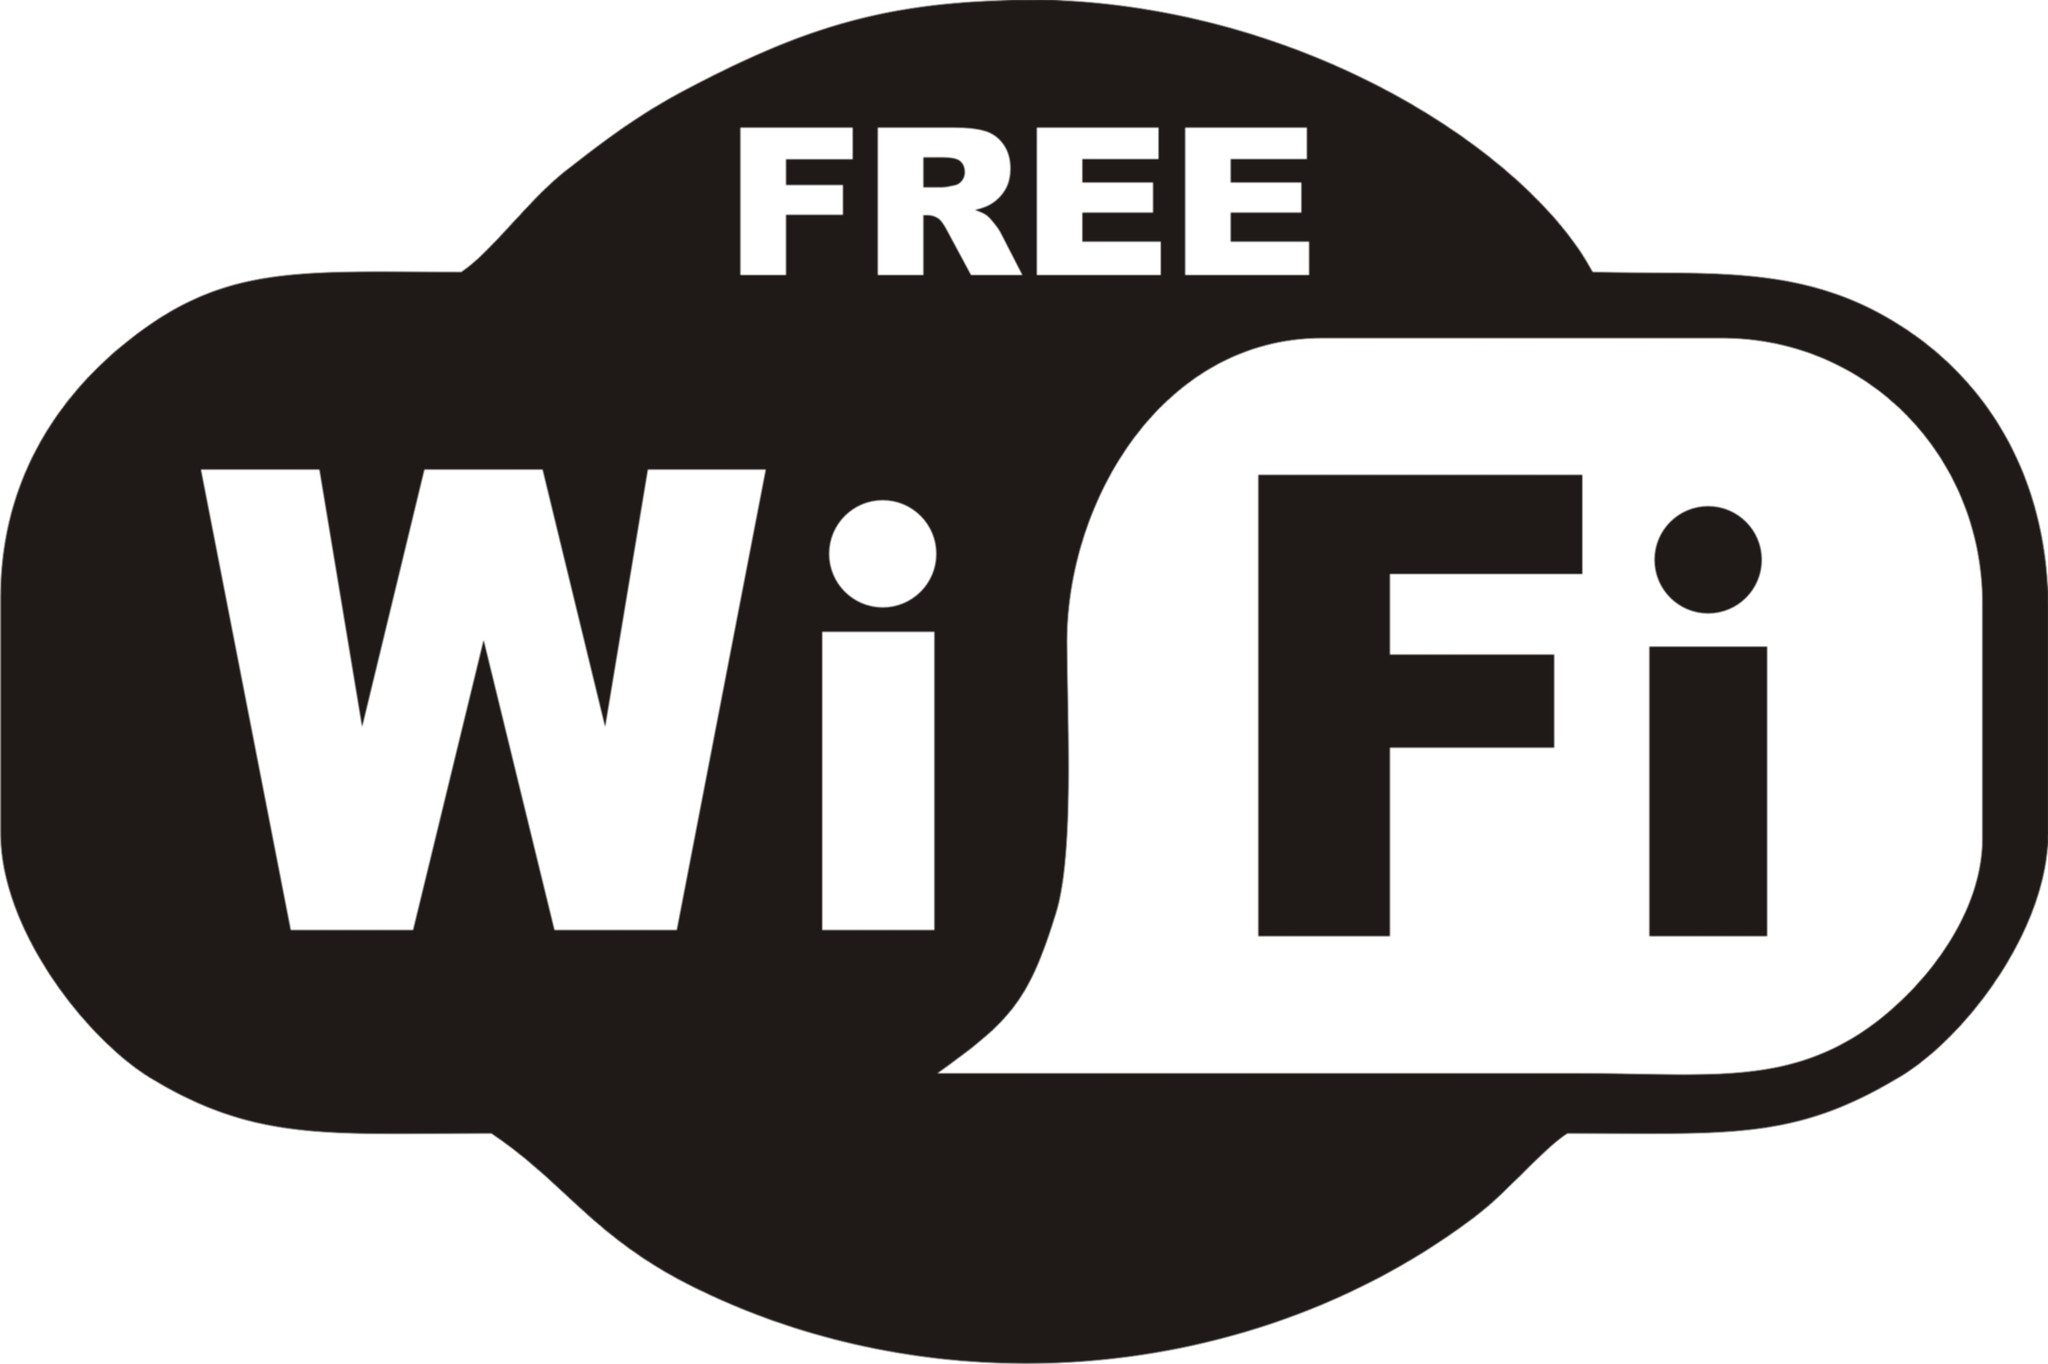 Learn How to Find Free Wifi With a Free App